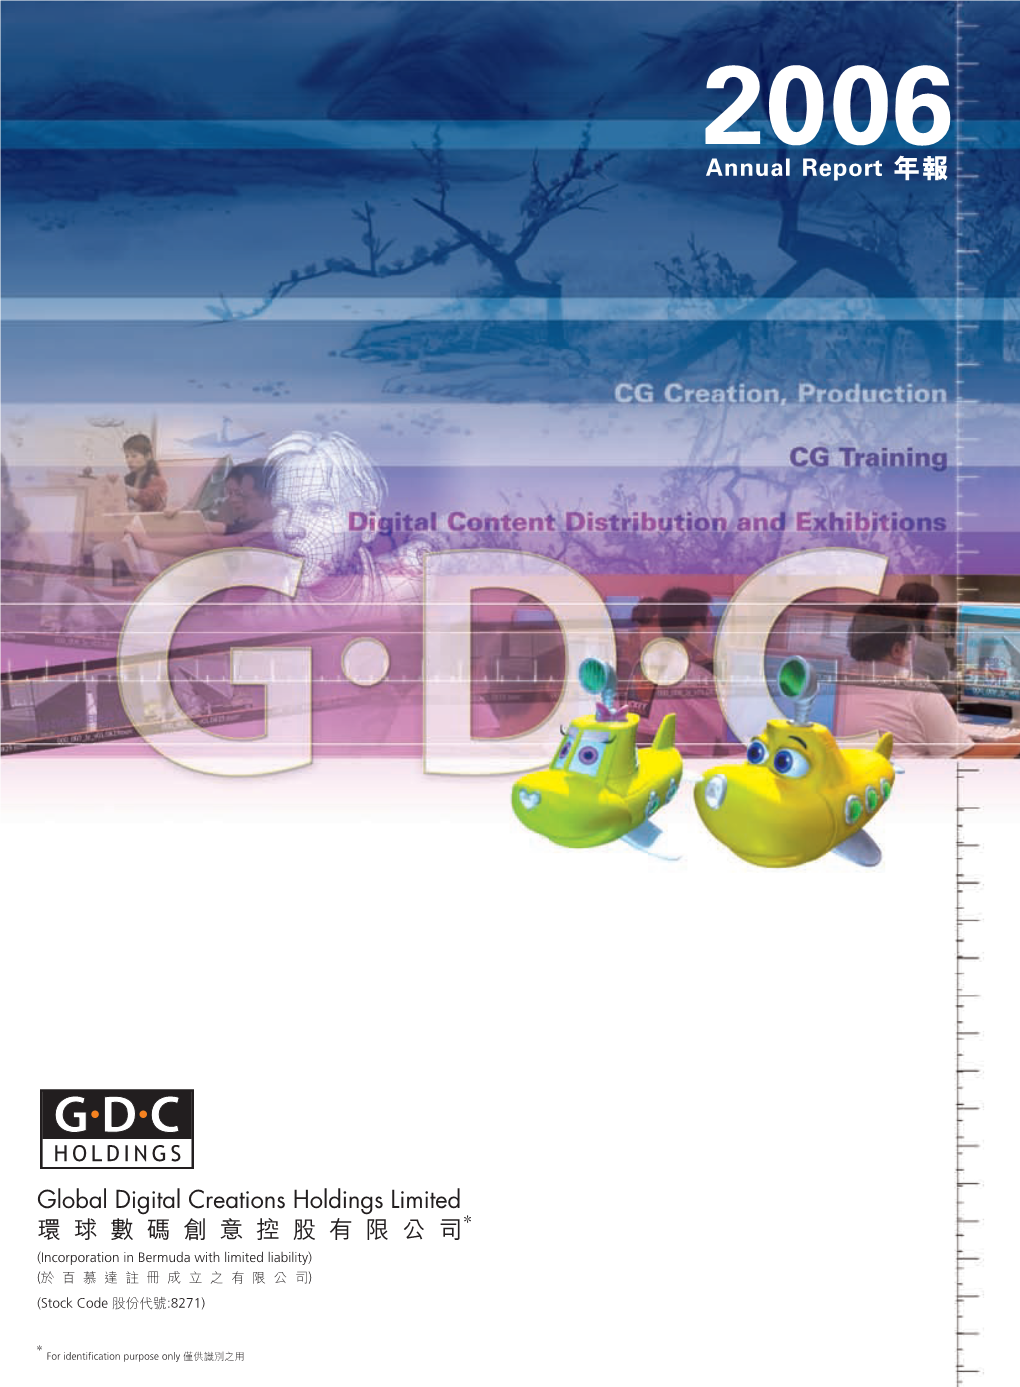 Annual Report 年報 Global Digital Creations Holdings Limited 司 公 限 有 股 控 意 創 碼 數 球 環 Annual Report 2006